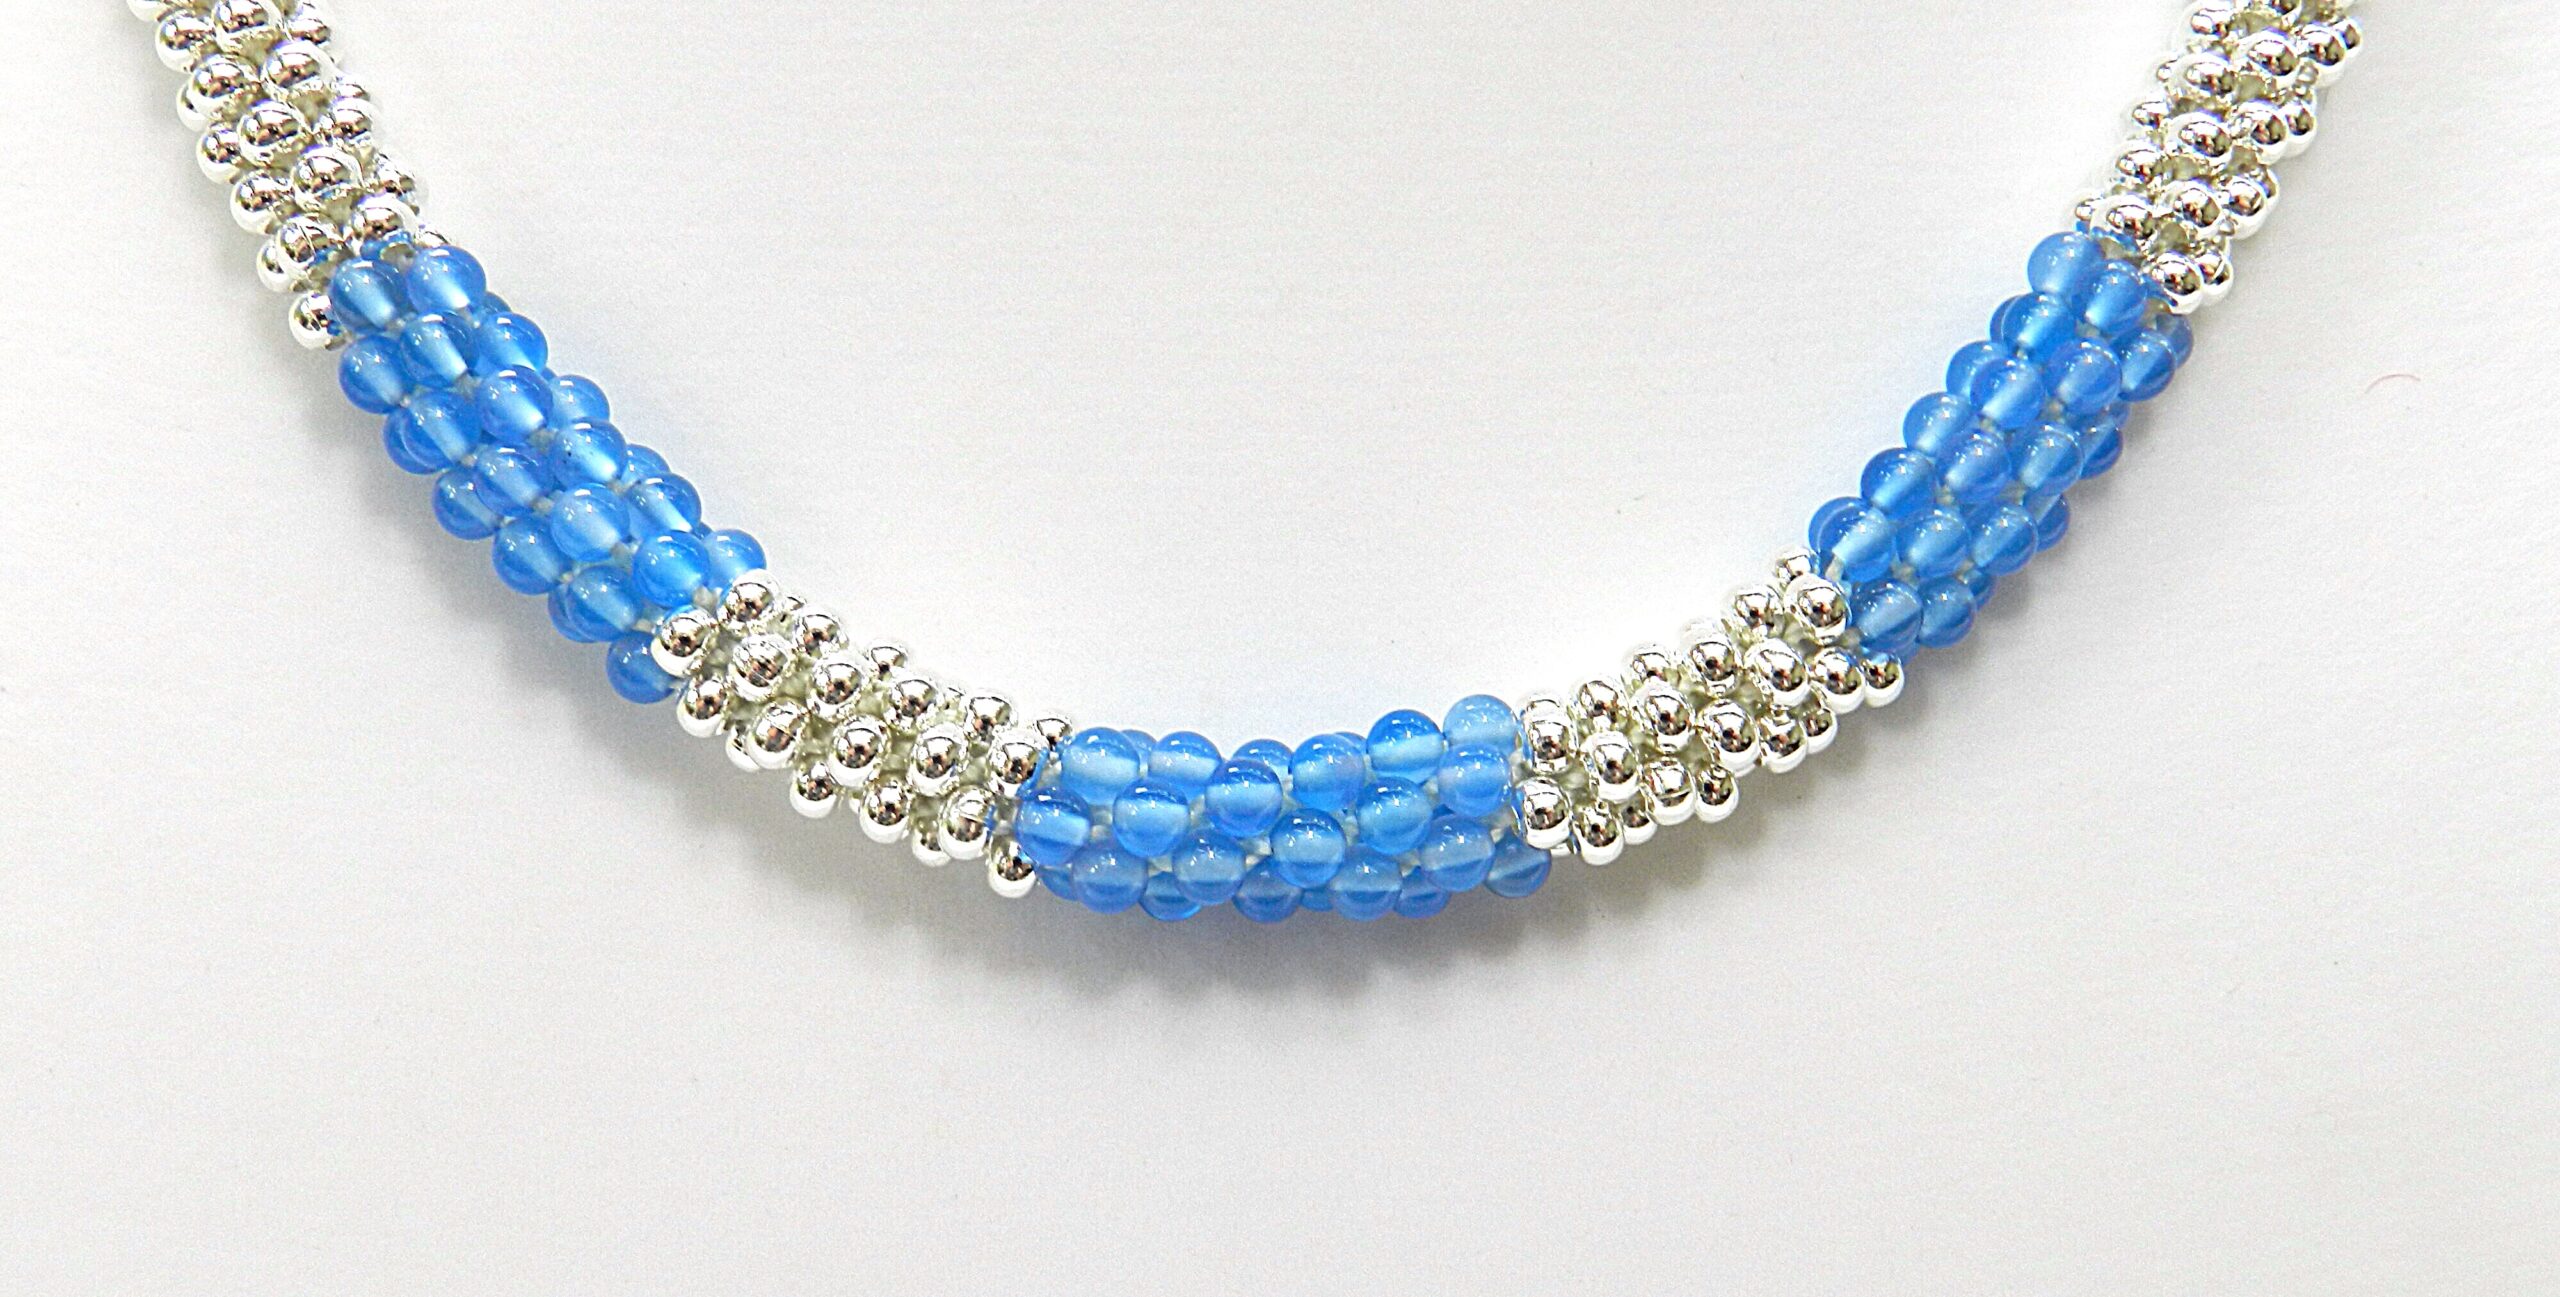 kumihimo necklace with metal seed beads and blue agate